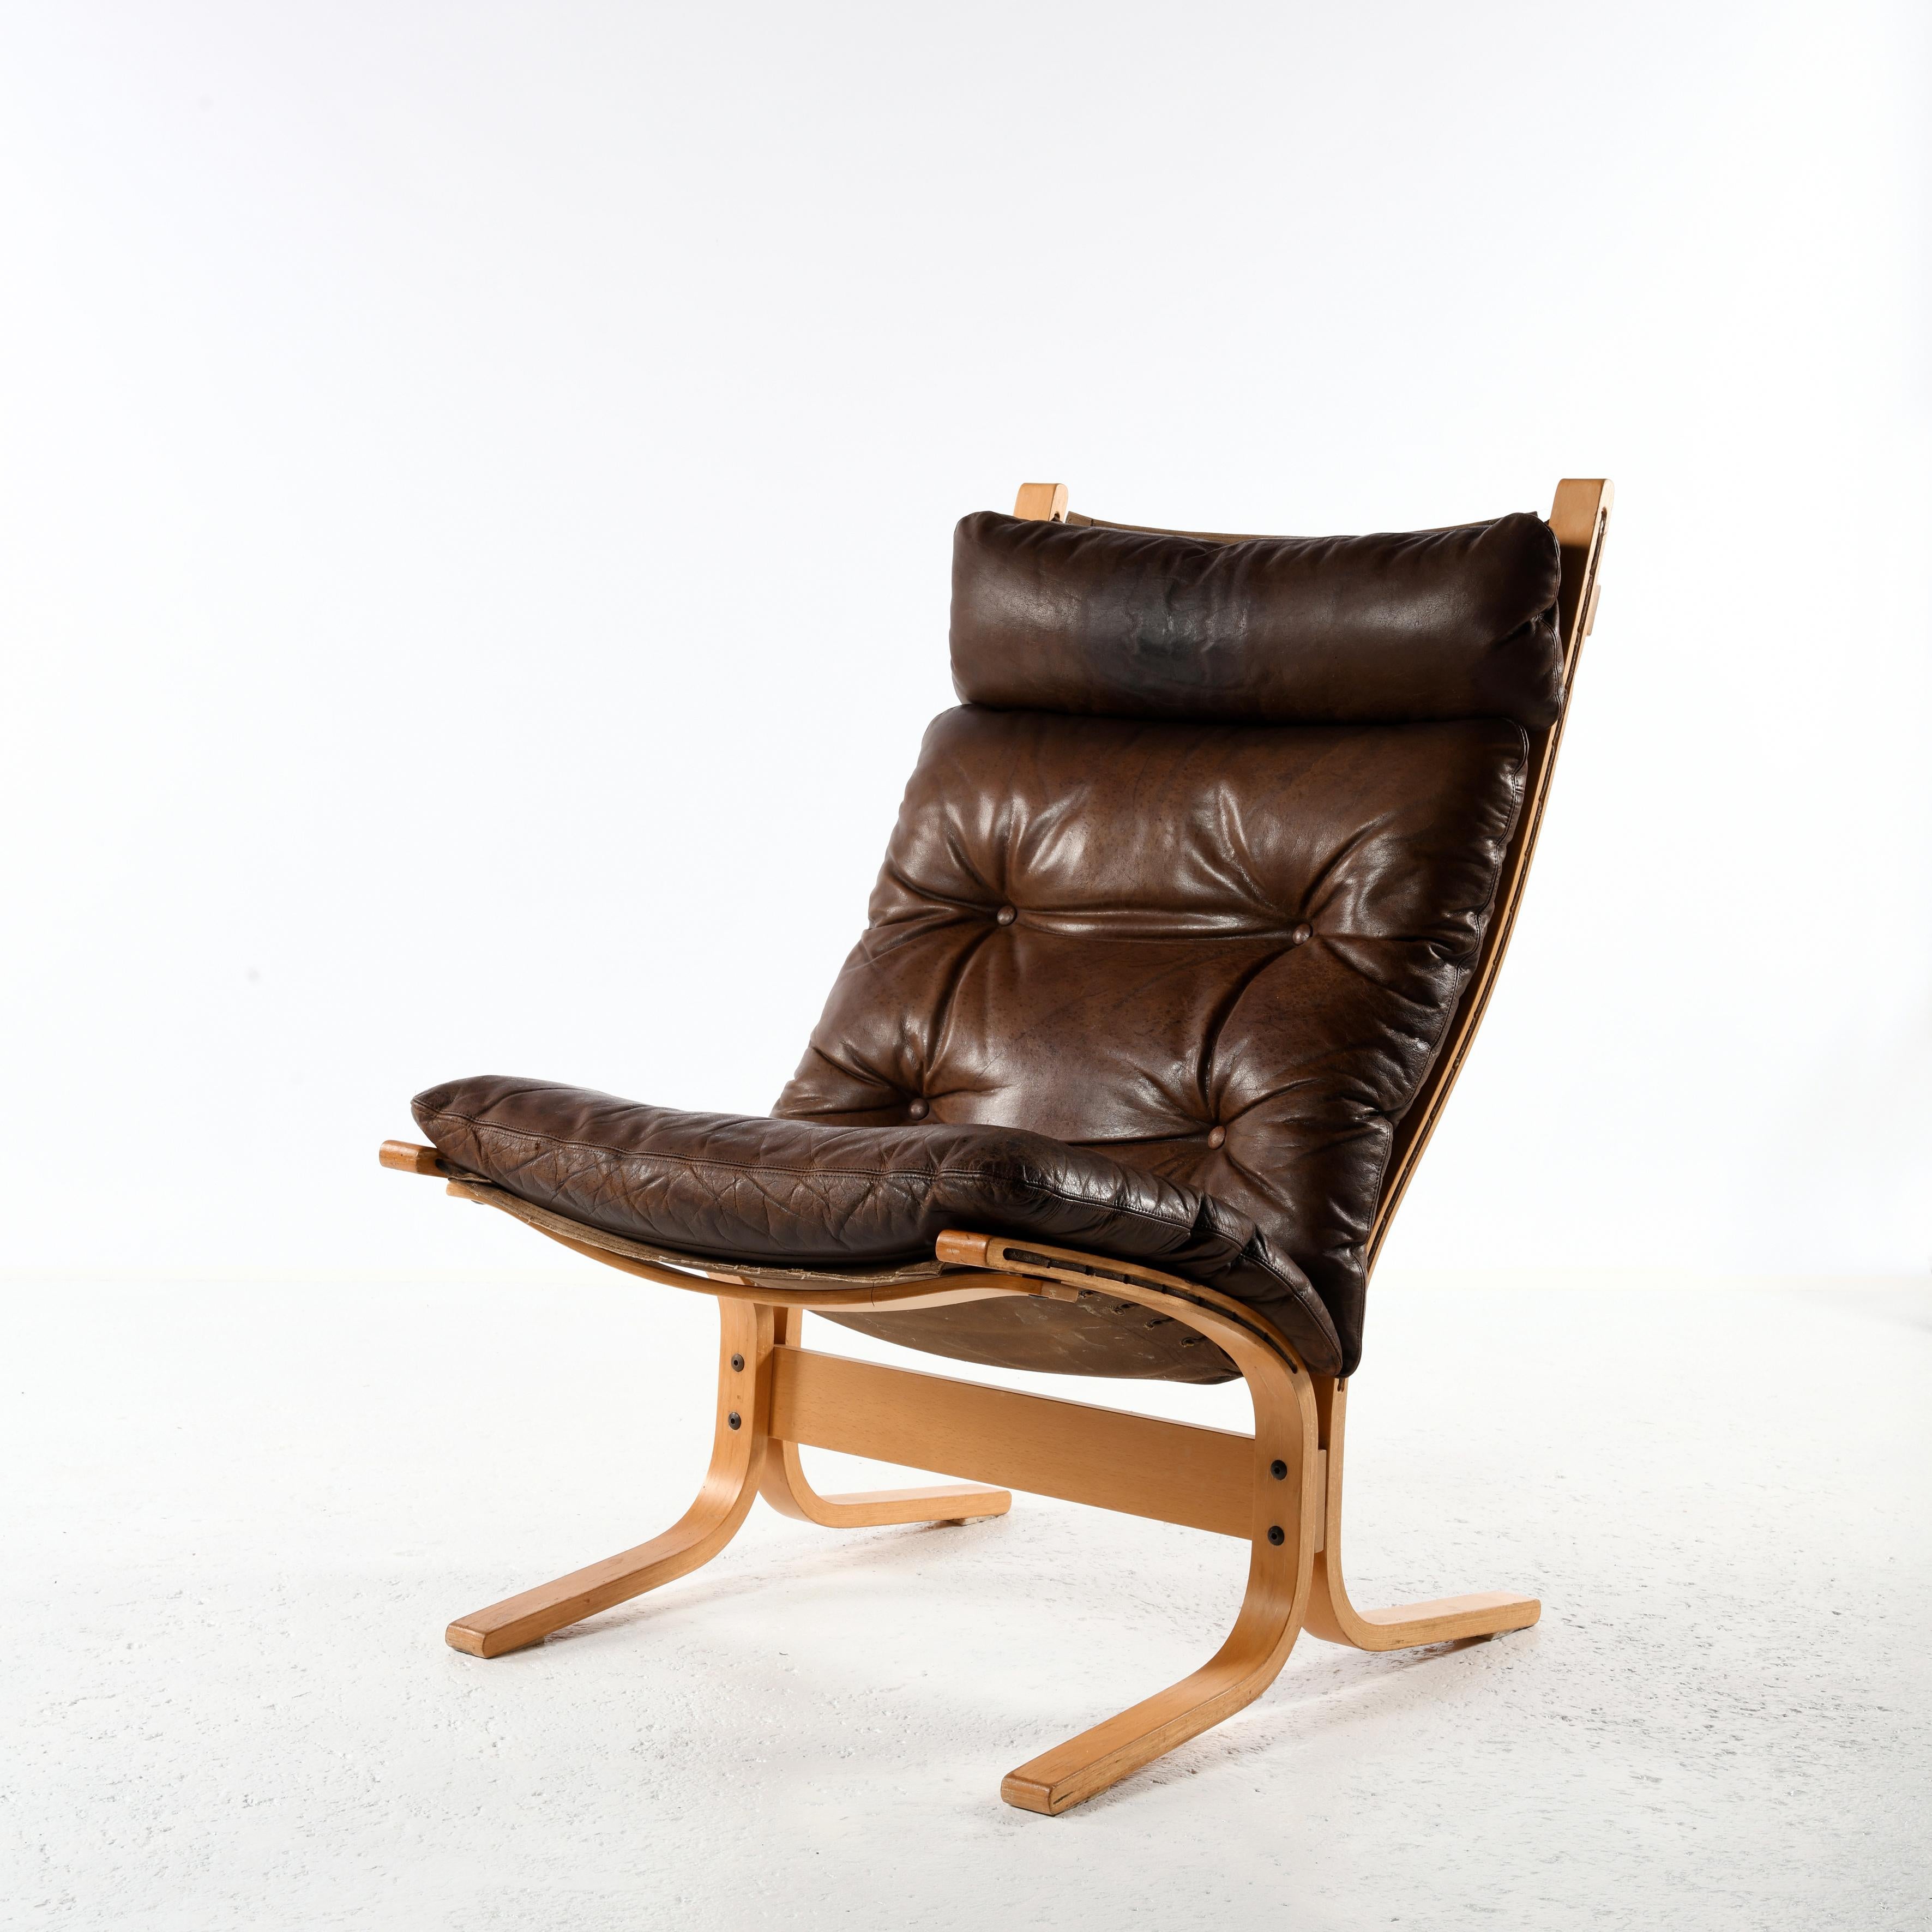 Siesta lounge chair, designed by Ingmar Relling (1920-2002) in 1965. Curved multi-ply beech frame, canvas stretched with rope and leather cushion. Frame and fabric in perfect condition, leather cushion with traces of use and patina.
Its evocative